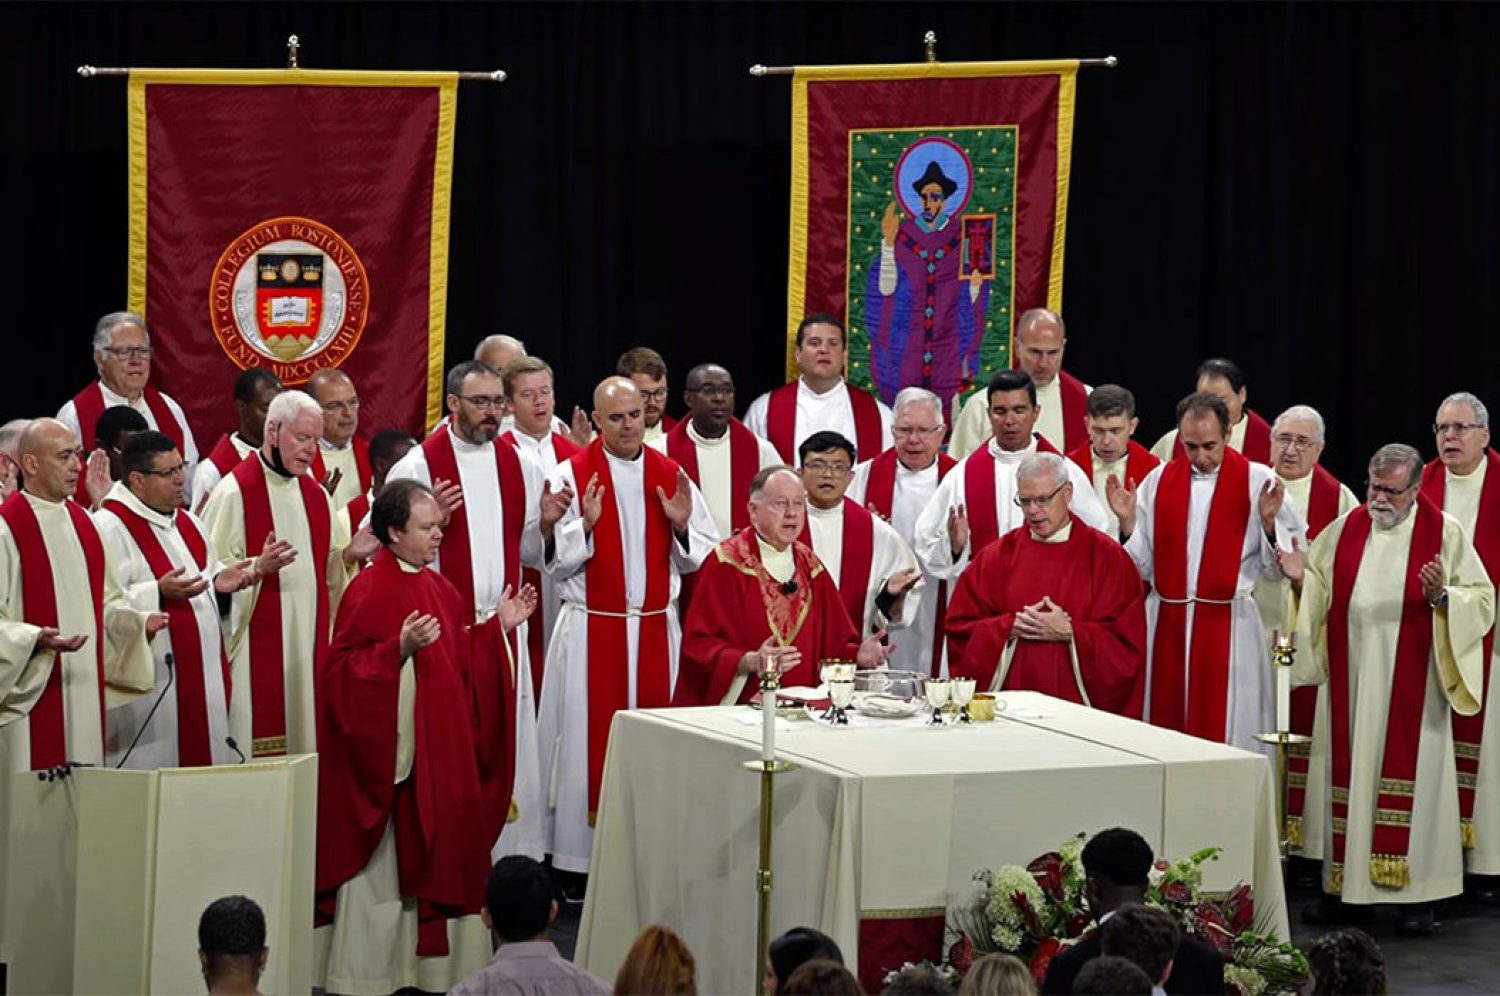 Priests celebrating Mass at Conte Forum